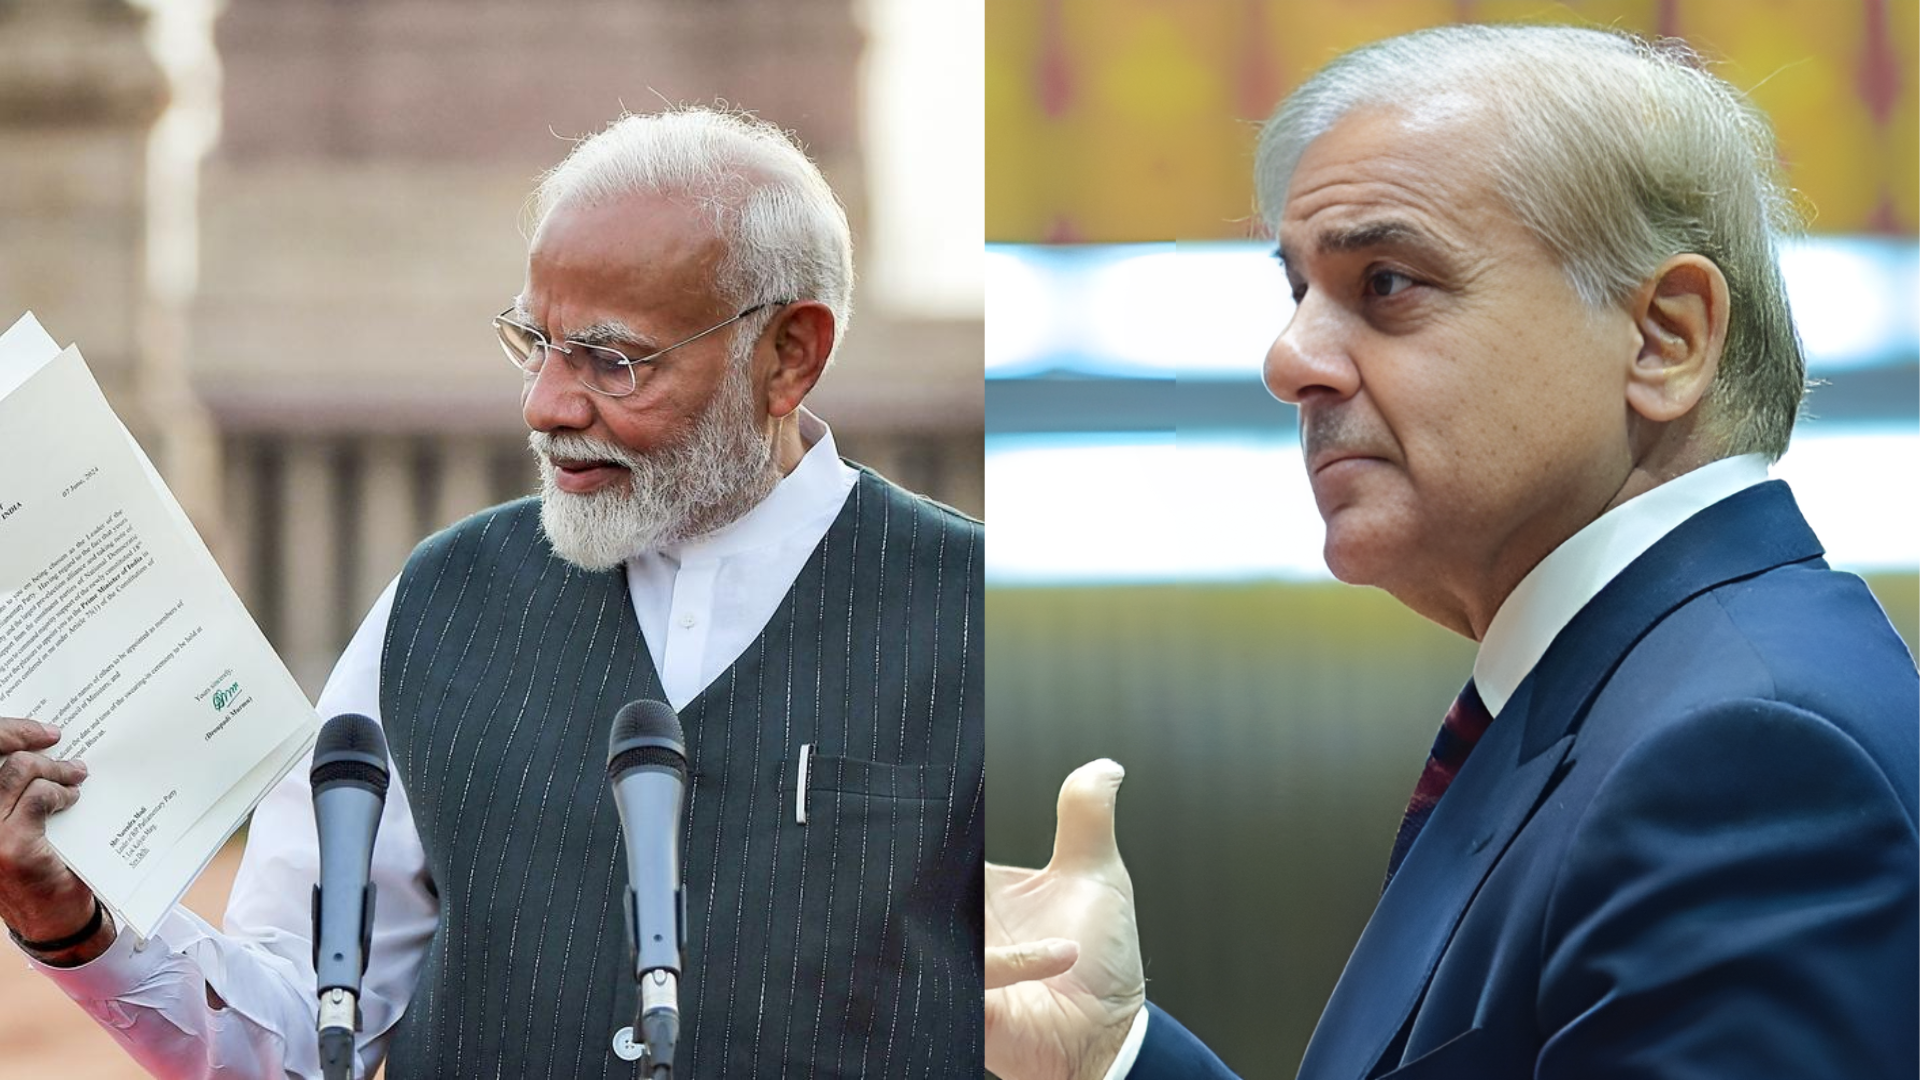 Shehbaz Sharif Extends Congratulations To PM Modi For Taking Oath On His Third Consecutive Term